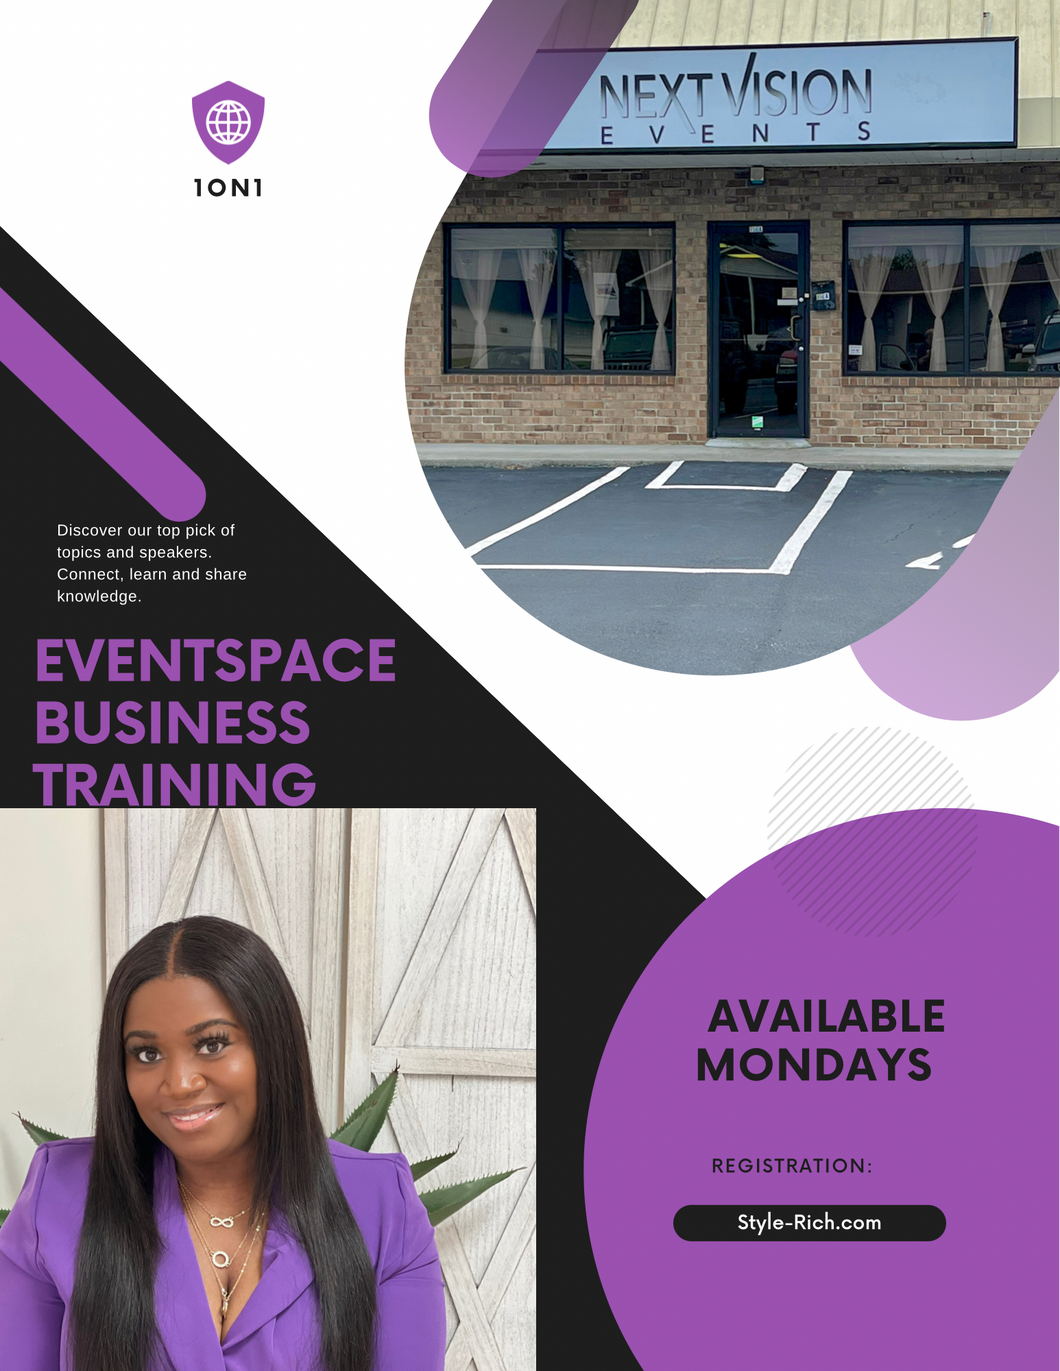 Eventspace 1on1 Training